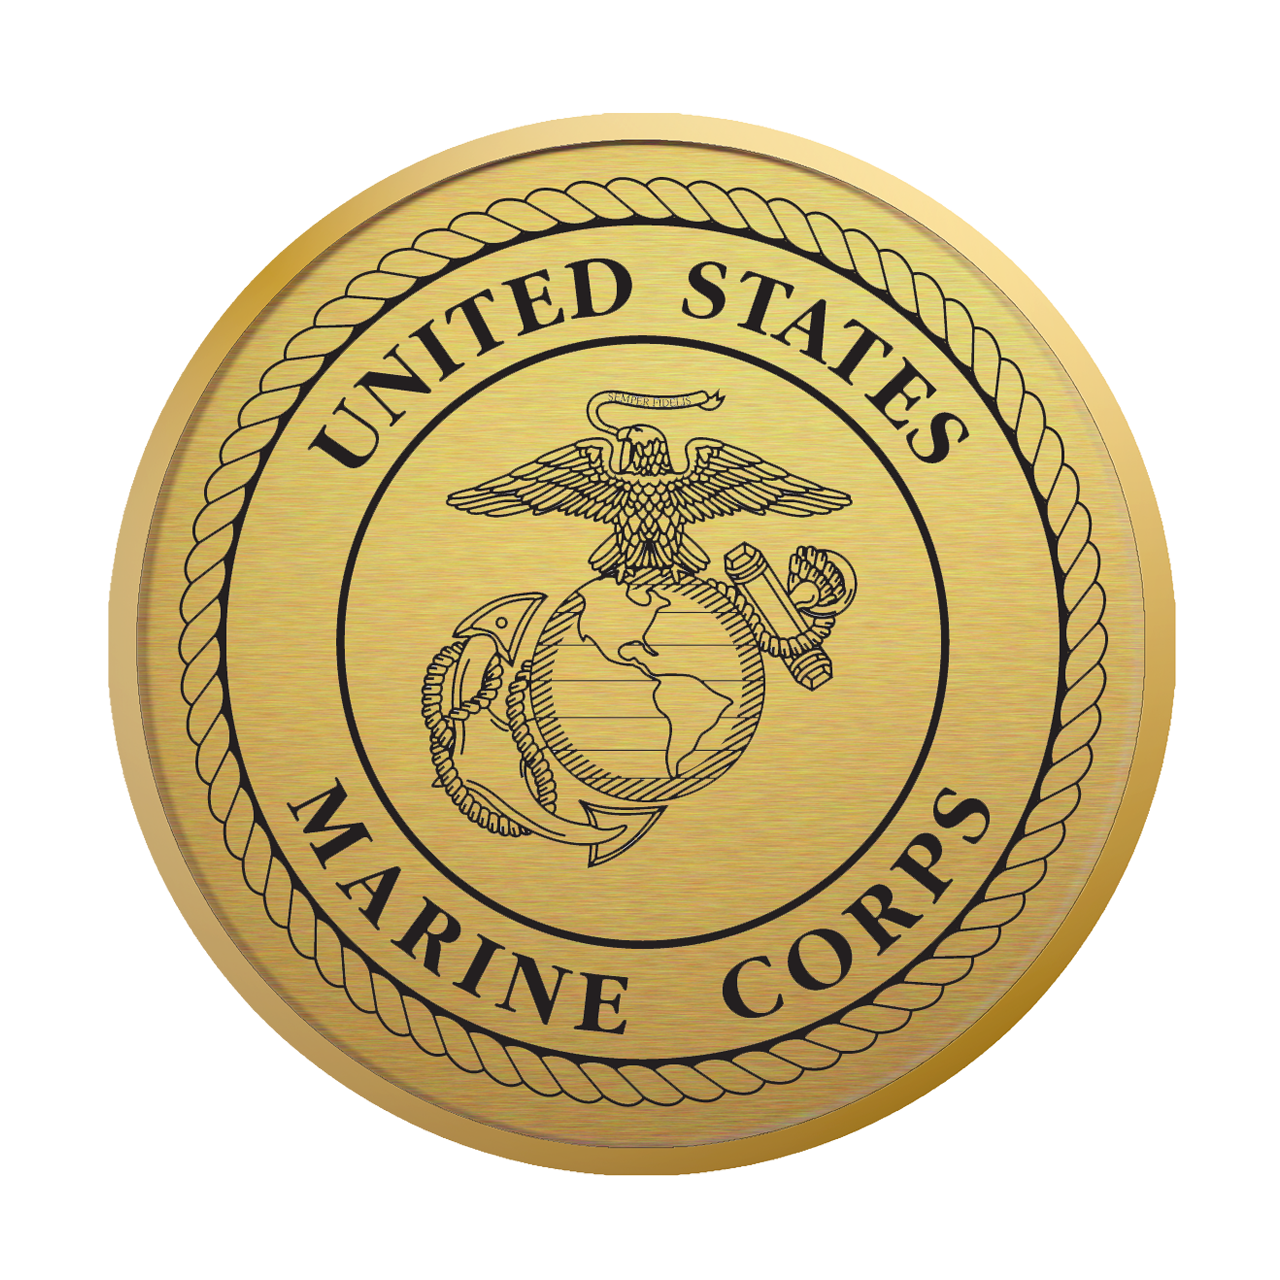 United States Marine Corps Gold Engraved Hampshire Certificate Frame (Horizontal)